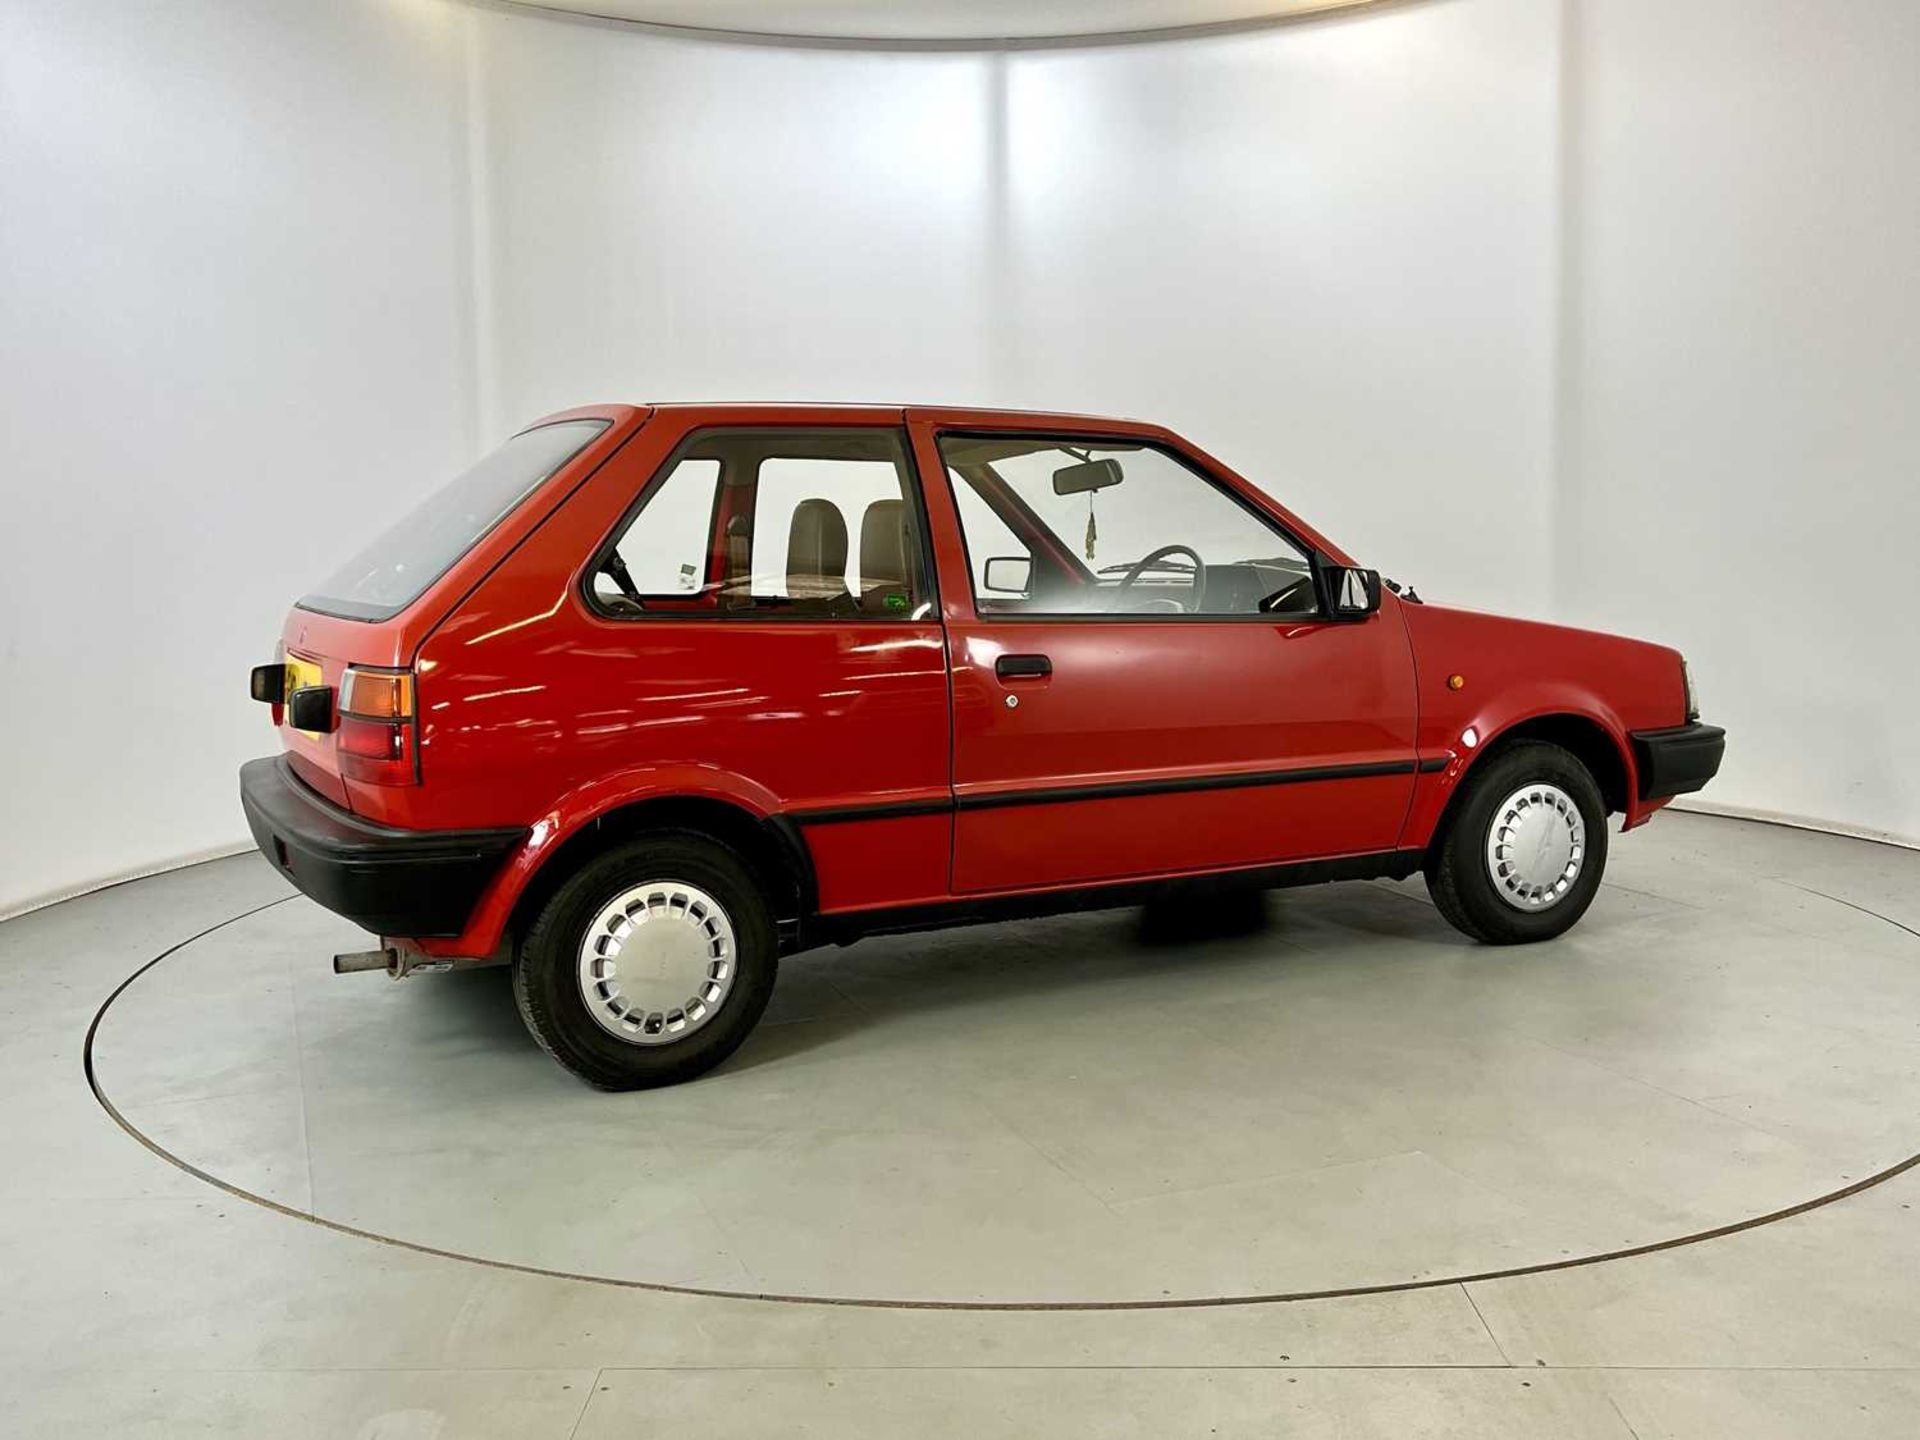 1987 Nissan Micra - Image 10 of 29